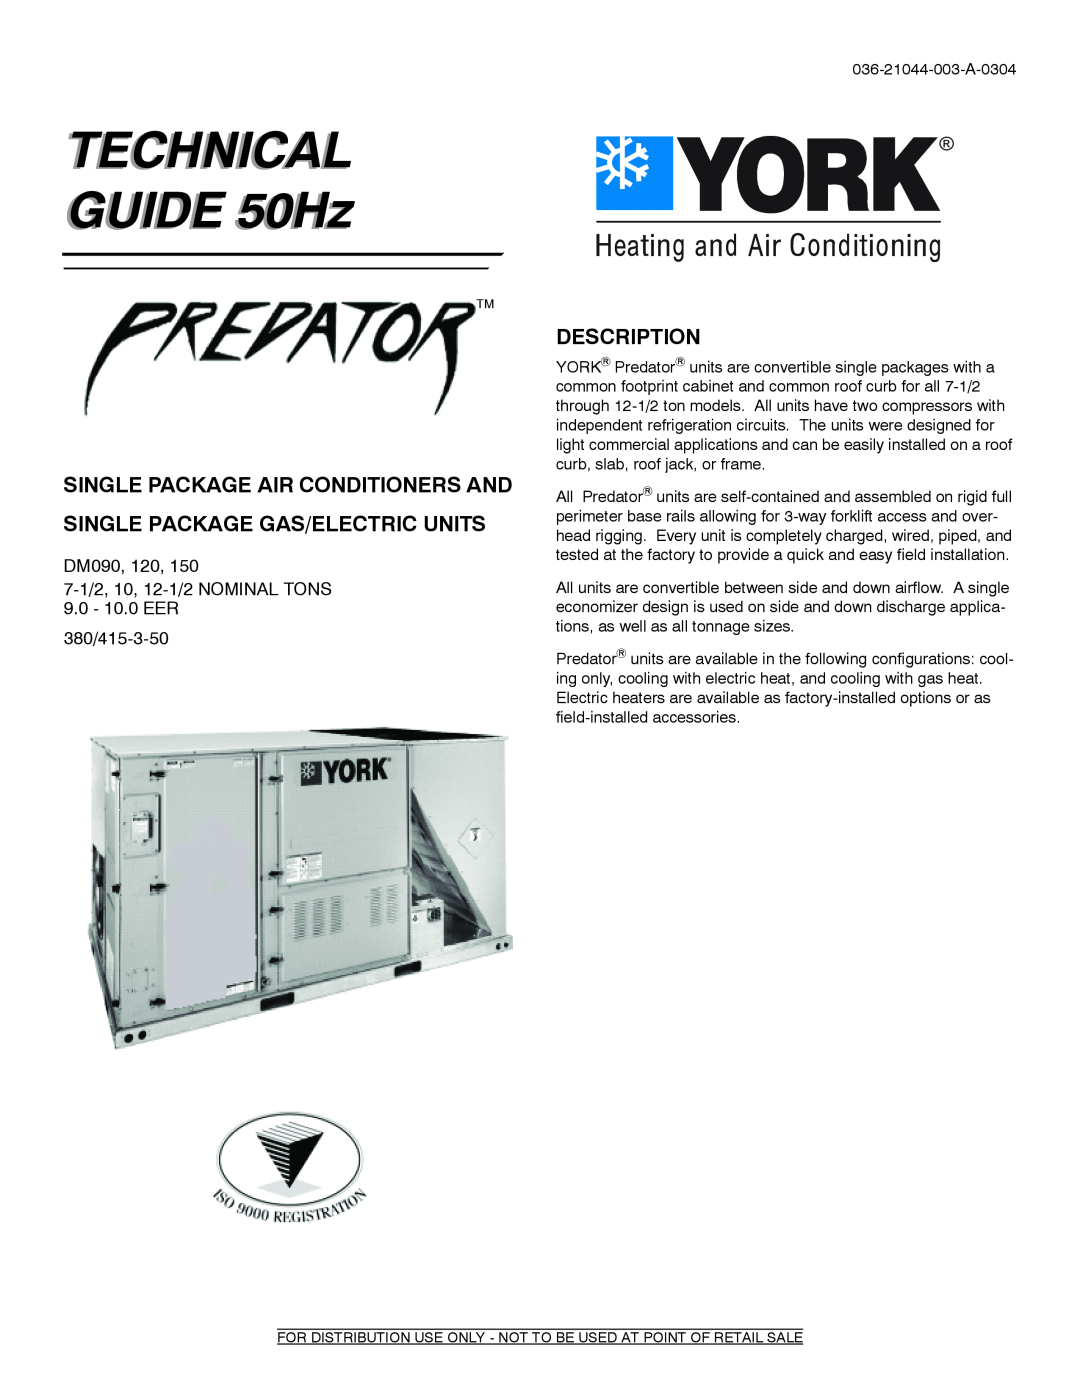 York DM120 manual Single Package Air Conditioners And Single Package Gas/Electric Units, Description, TECHNICAL GUIDE 50Hz 